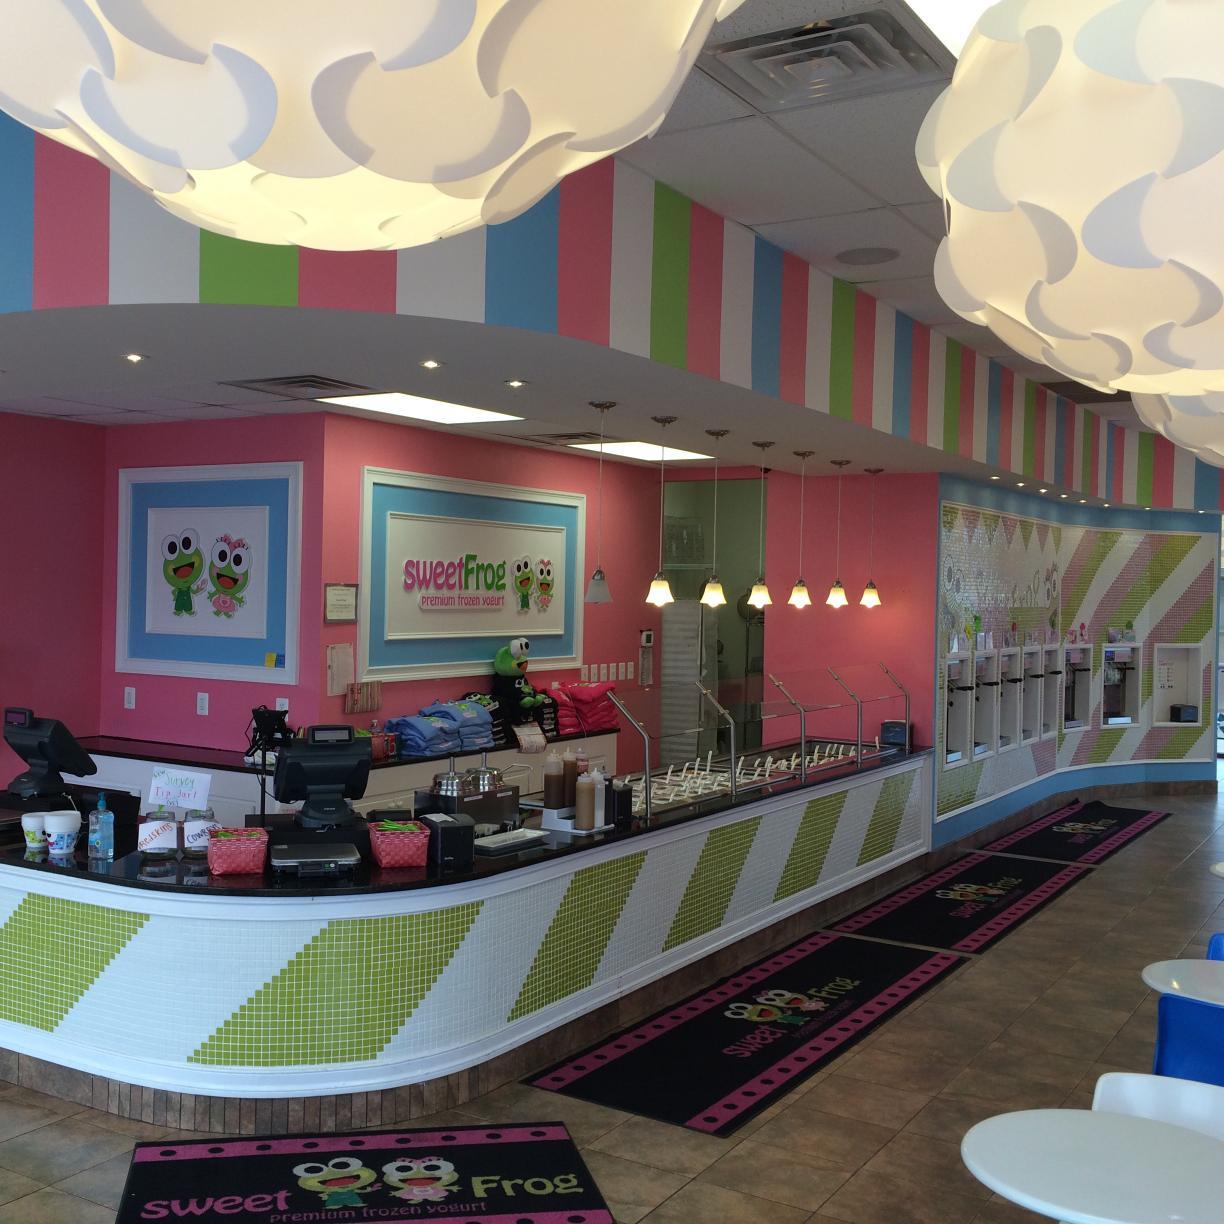 SweetFrog Premium Frozen Yogurt puts you in charge of the fun! With endless yogurt and topping combinations, each creation is unique--not to mention delicious!